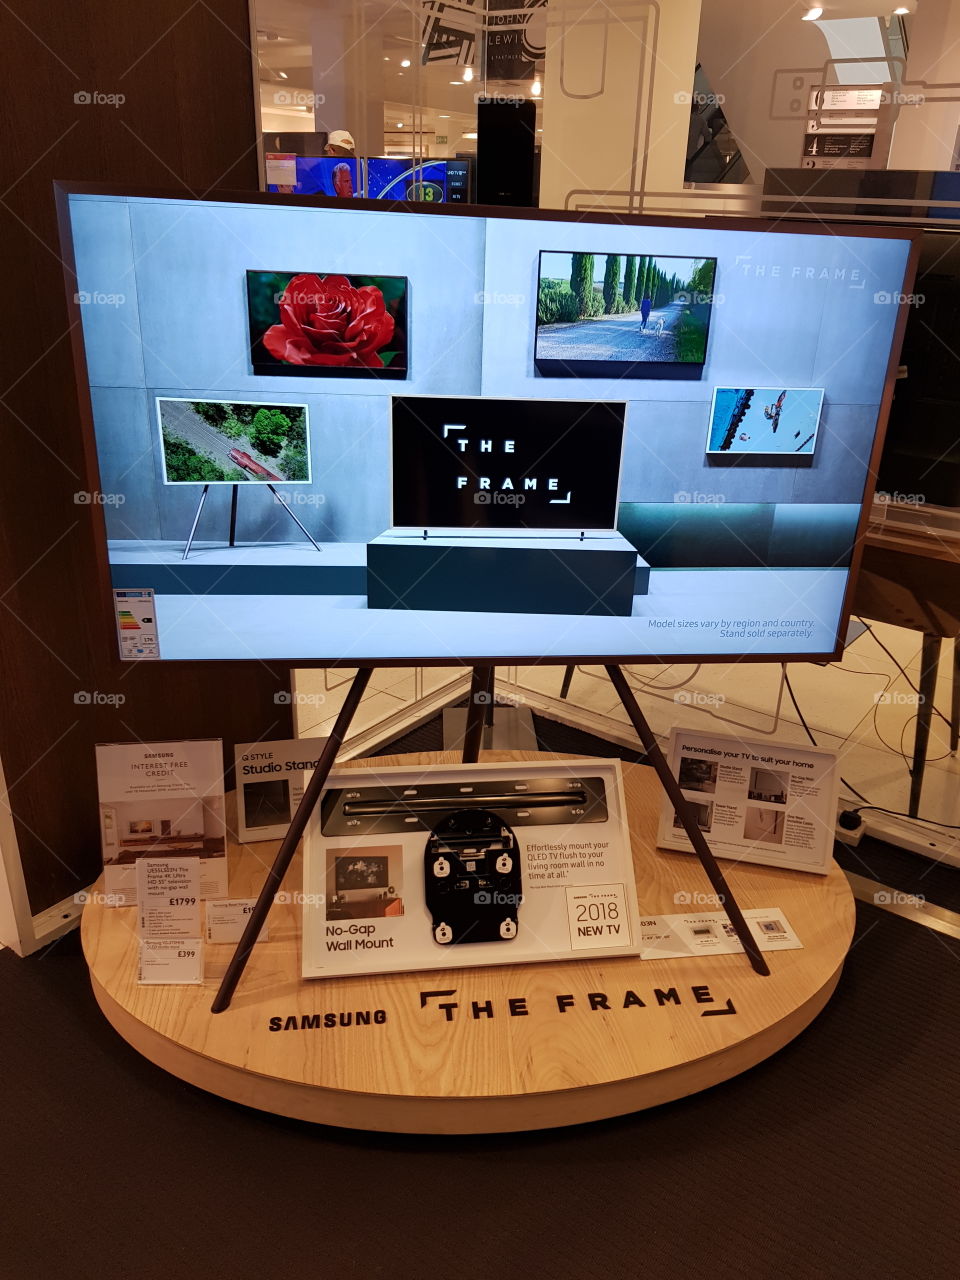 Samsung The Frame art mode 4K Ultra High Definition TV on studio stand easel with no gap wall mount in the premium room at Peter Jones department store Sloane square Chelsea Kings road London